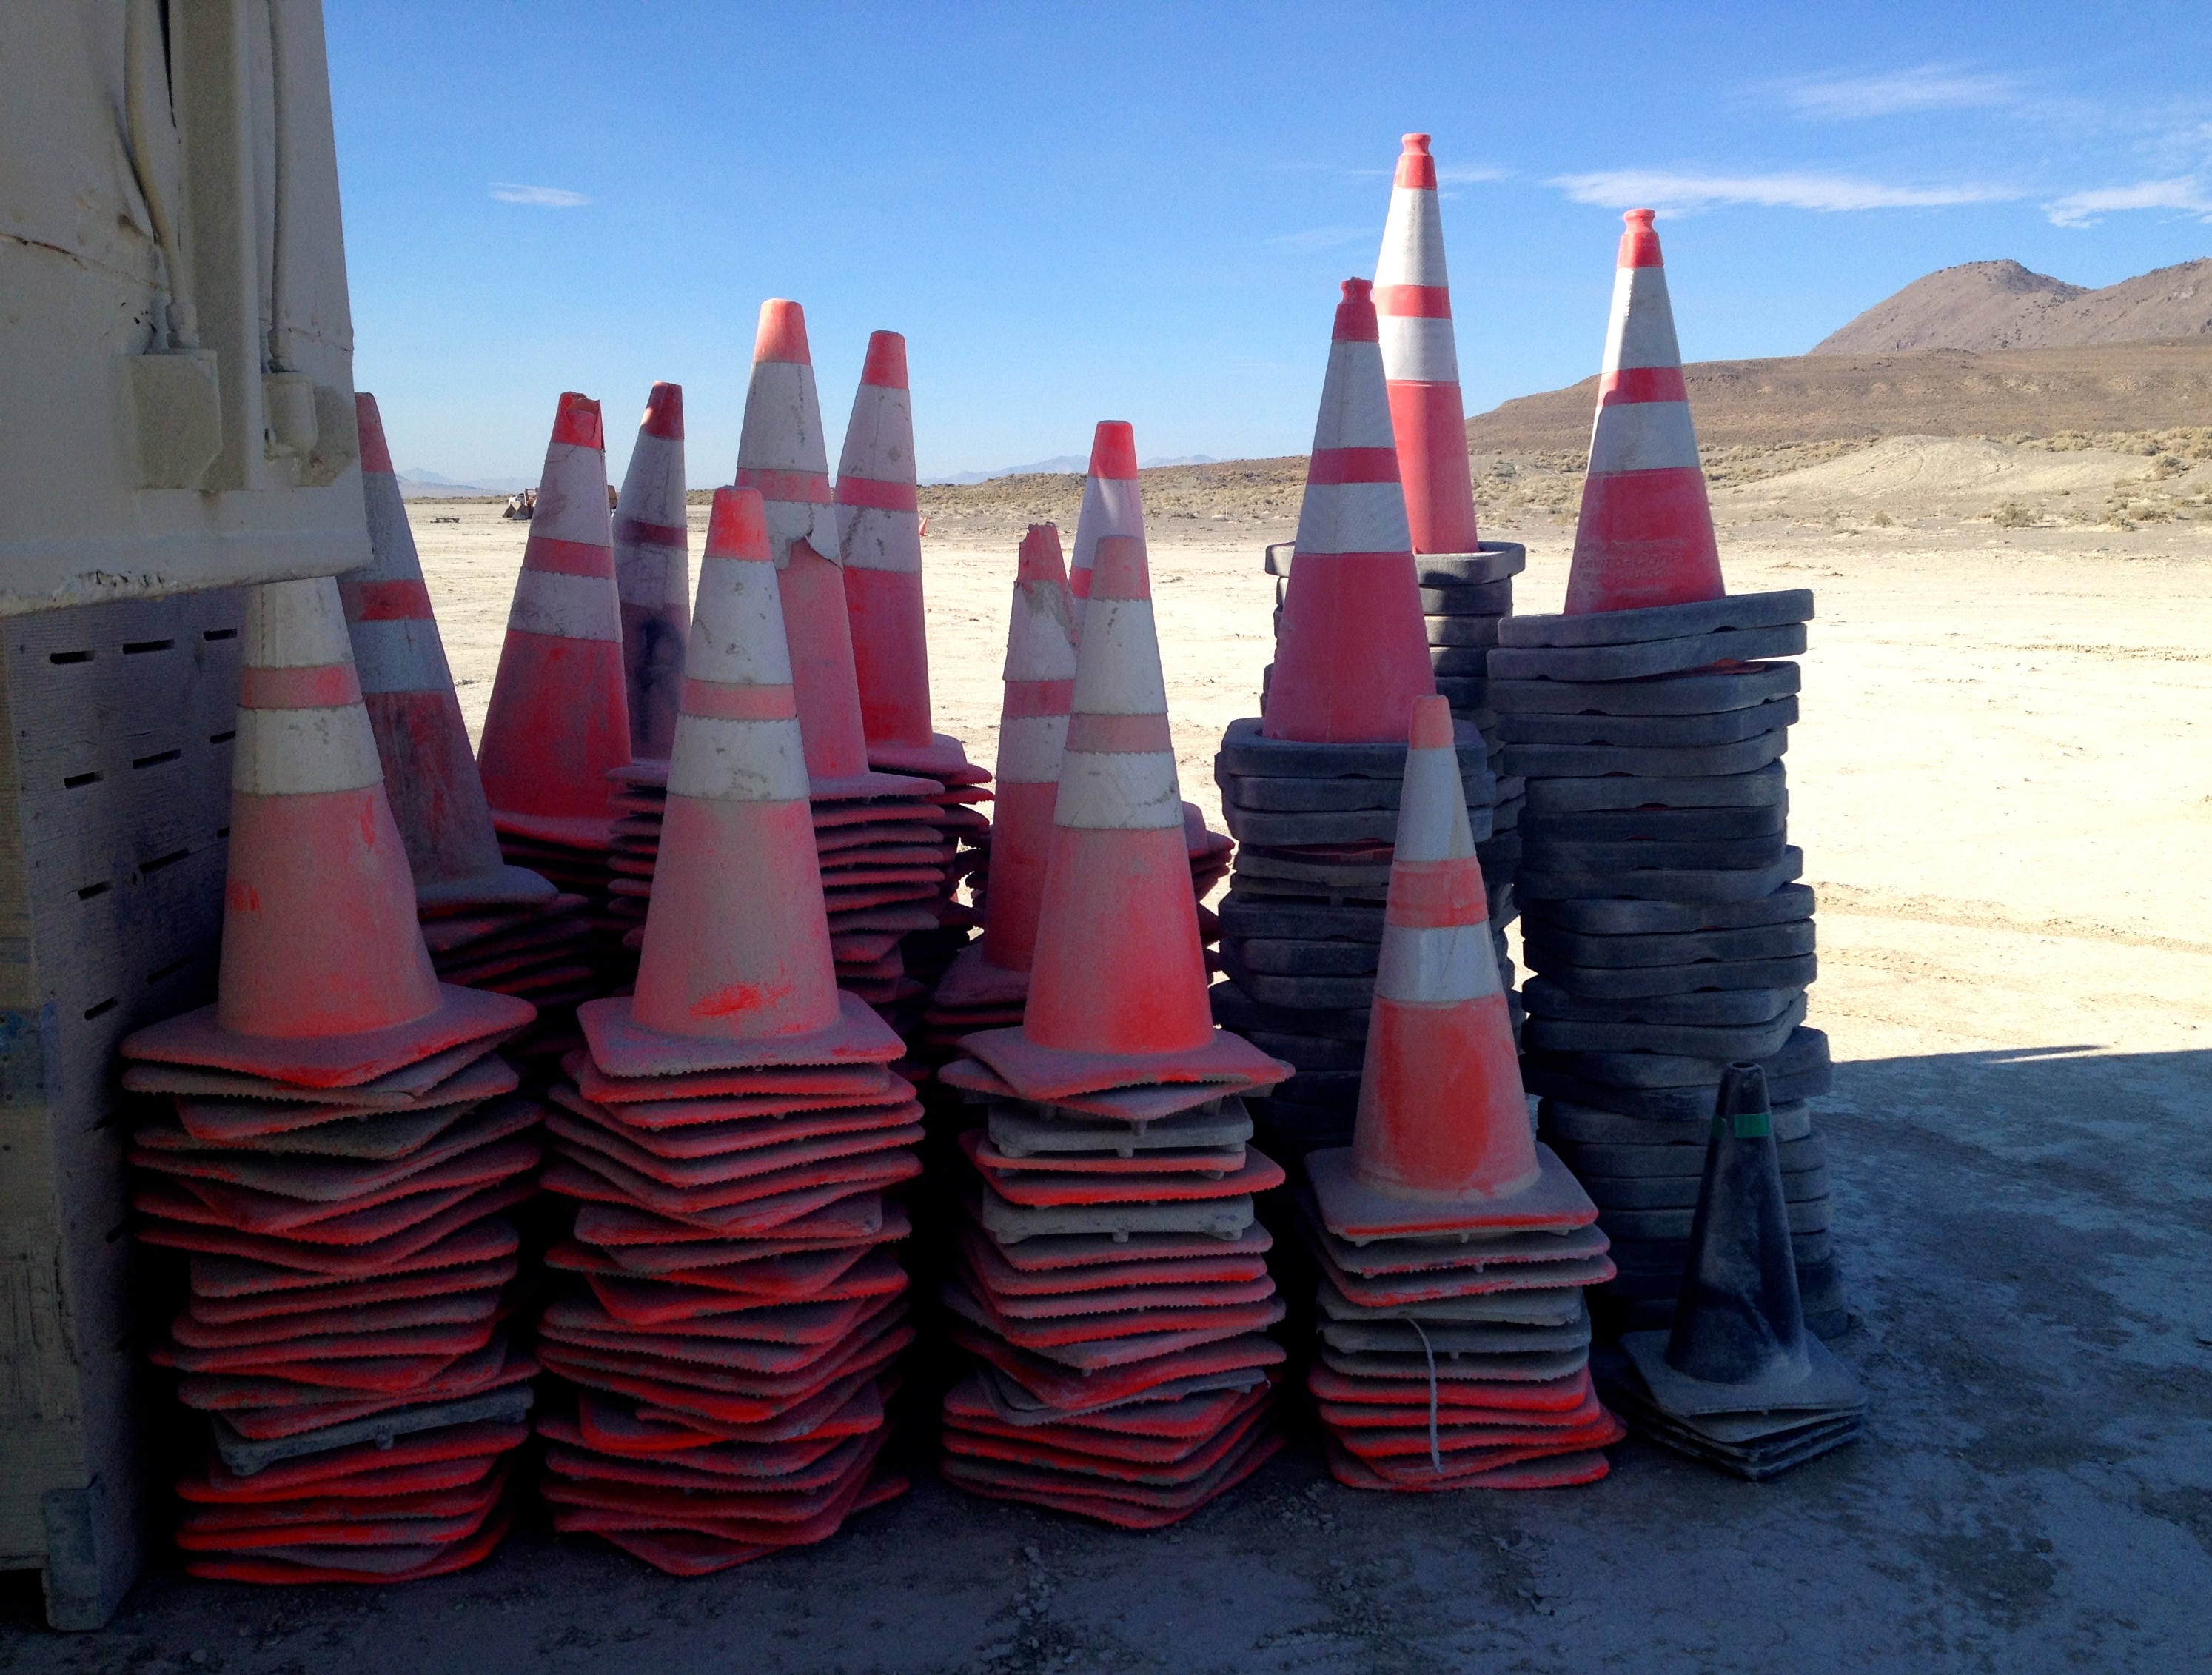 It's Resto, so the phrase DEATH TO ALL CONES rings out here and there. This is one graveyard for cones killed by Special Forces. They'll be reincarnated to mark more hot spots and dunes to bust. 